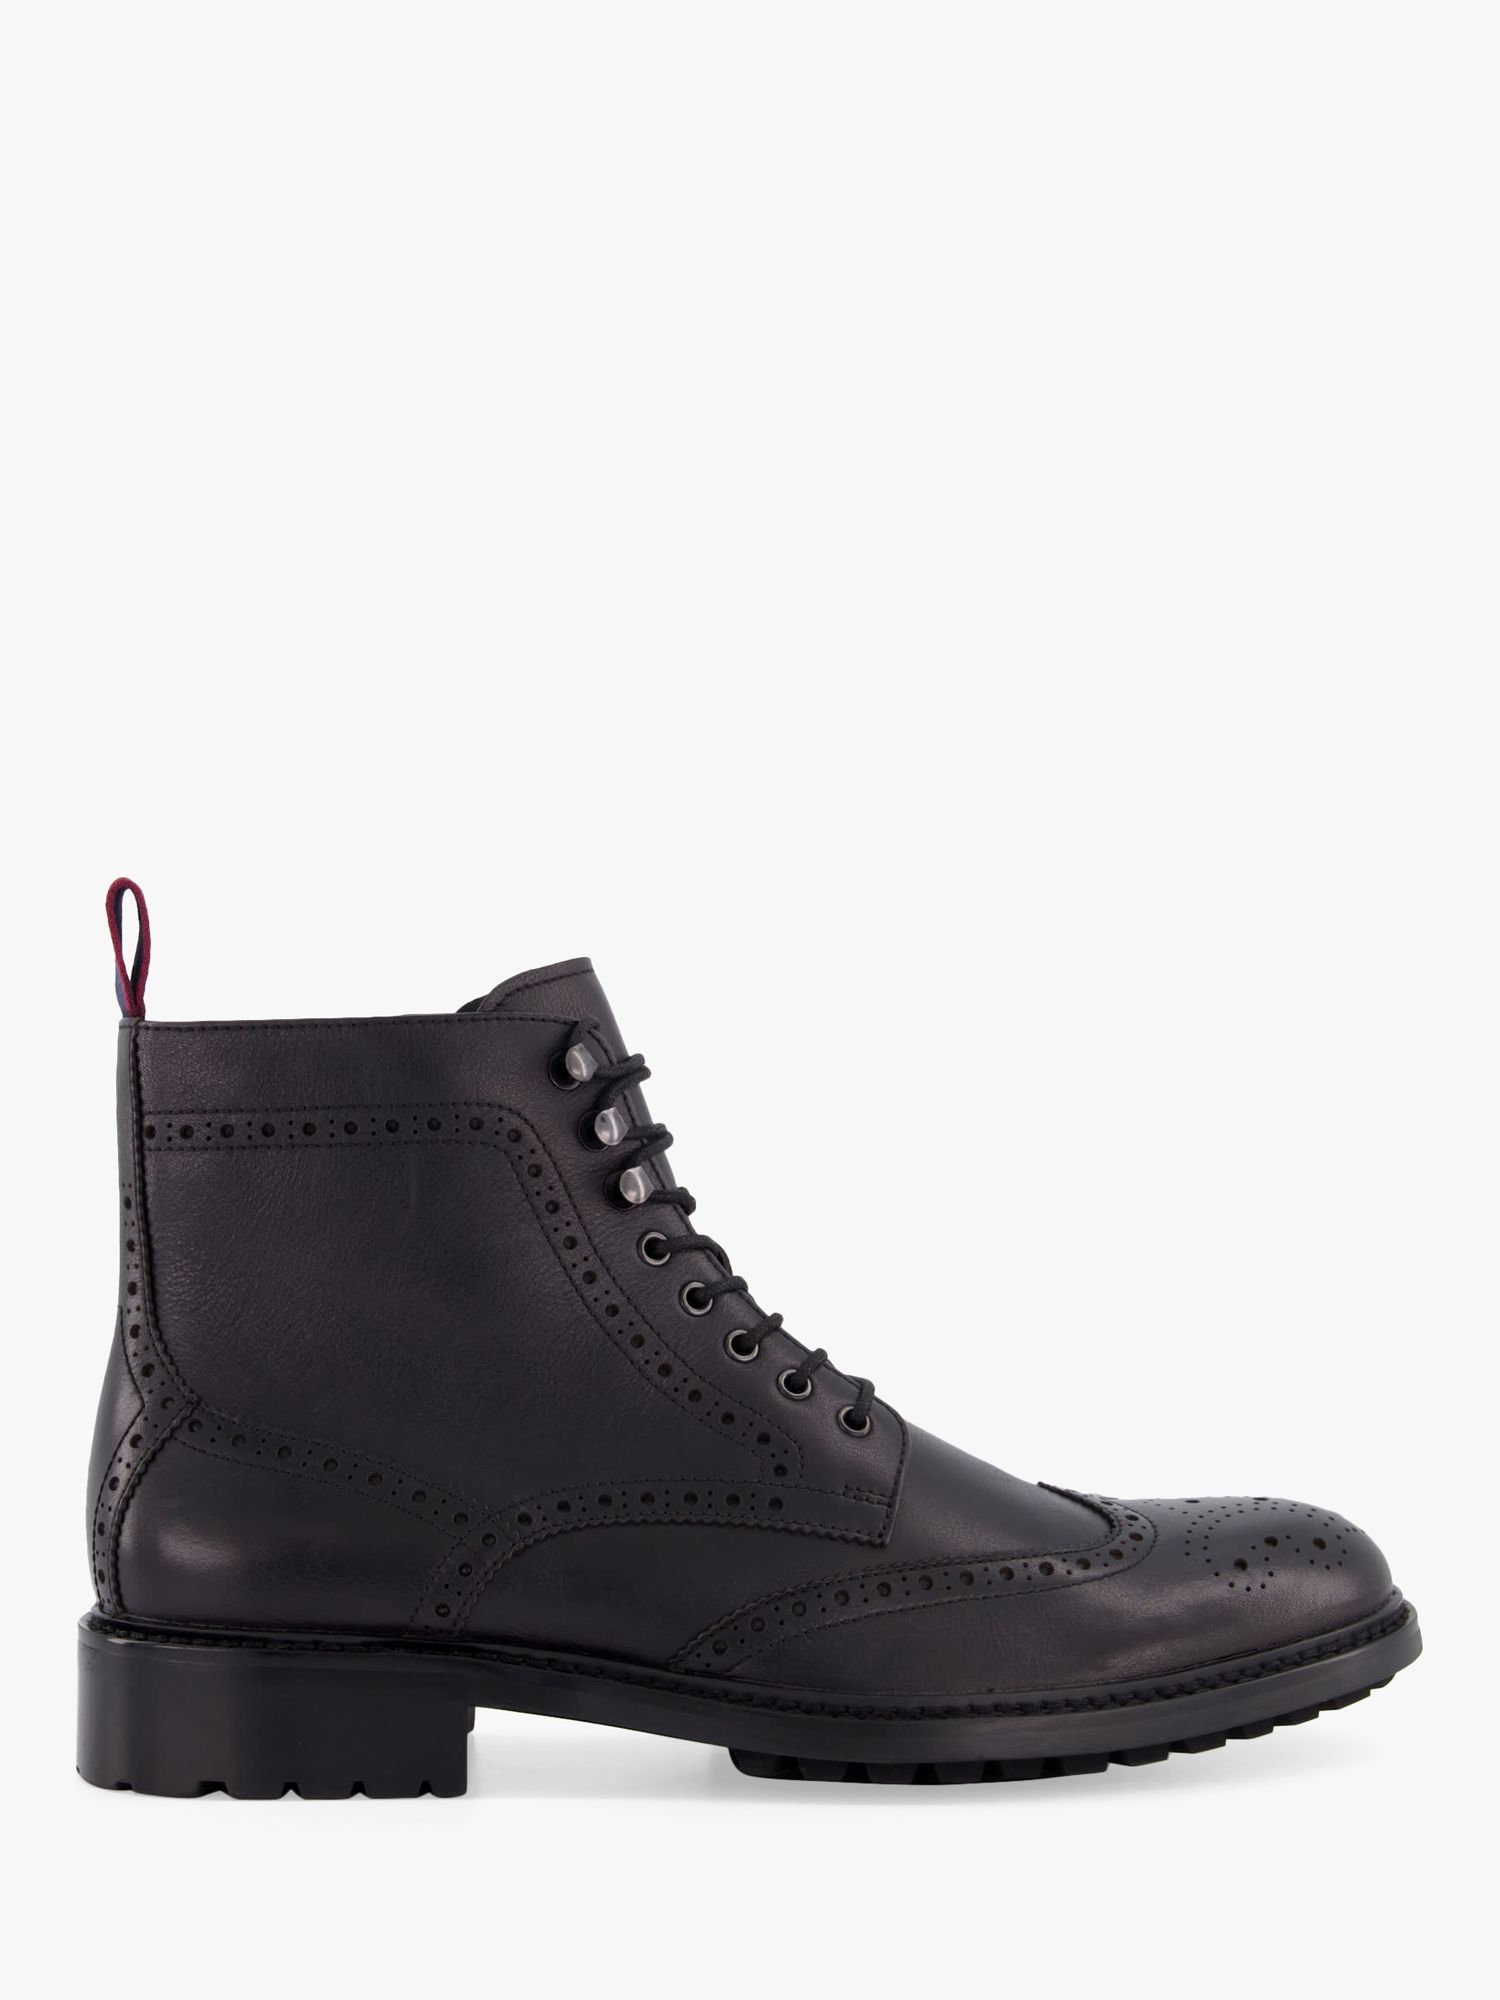 Dune Masked Leather Derby Boots, Black at John Lewis & Partners